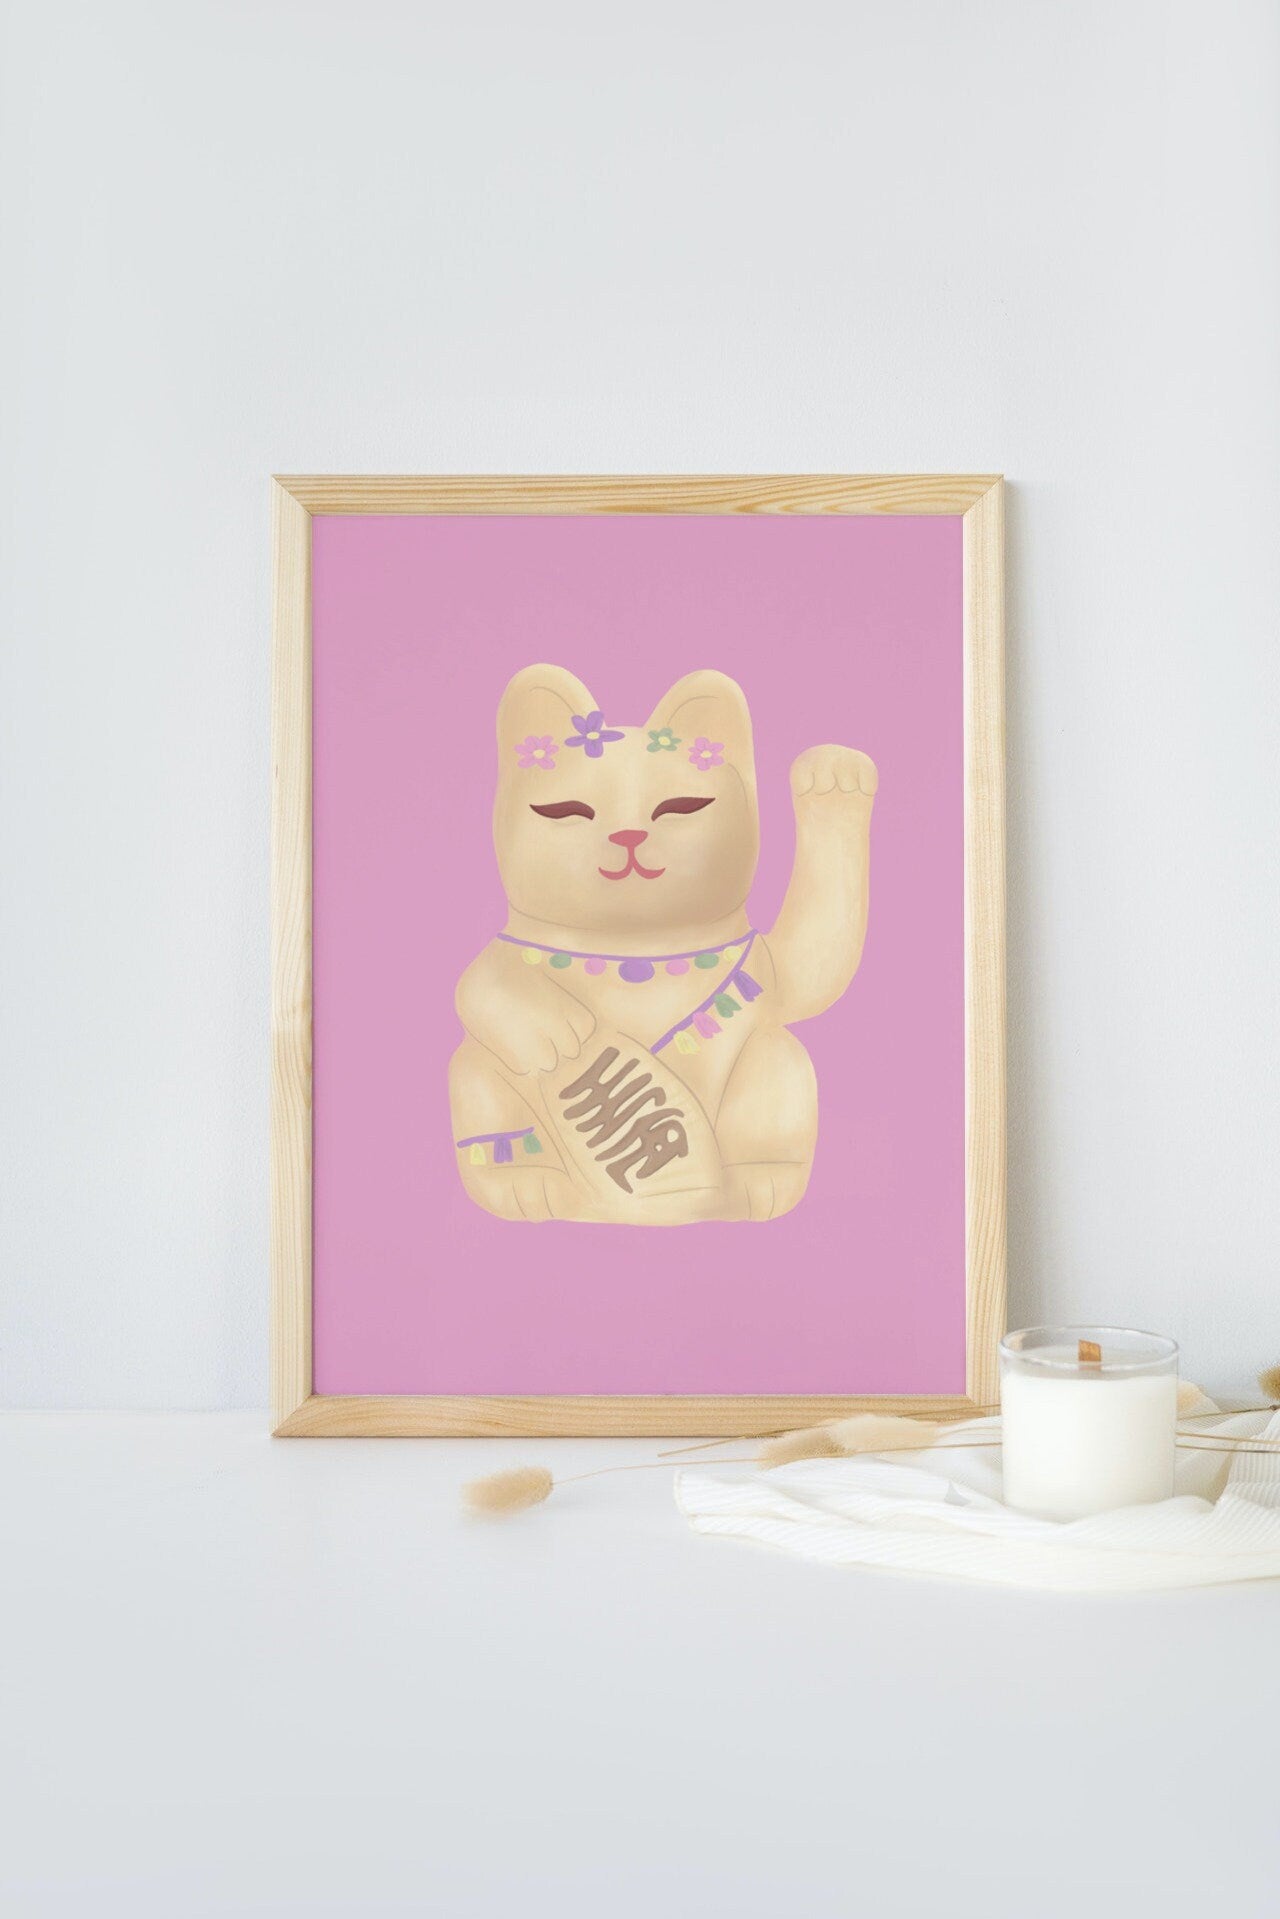 LUCKY CAT PRINT Oriental painting fortune feng shui, Chinese lucky cat graphic print, A4 100% recycled card in the U.K. pink wall art decor